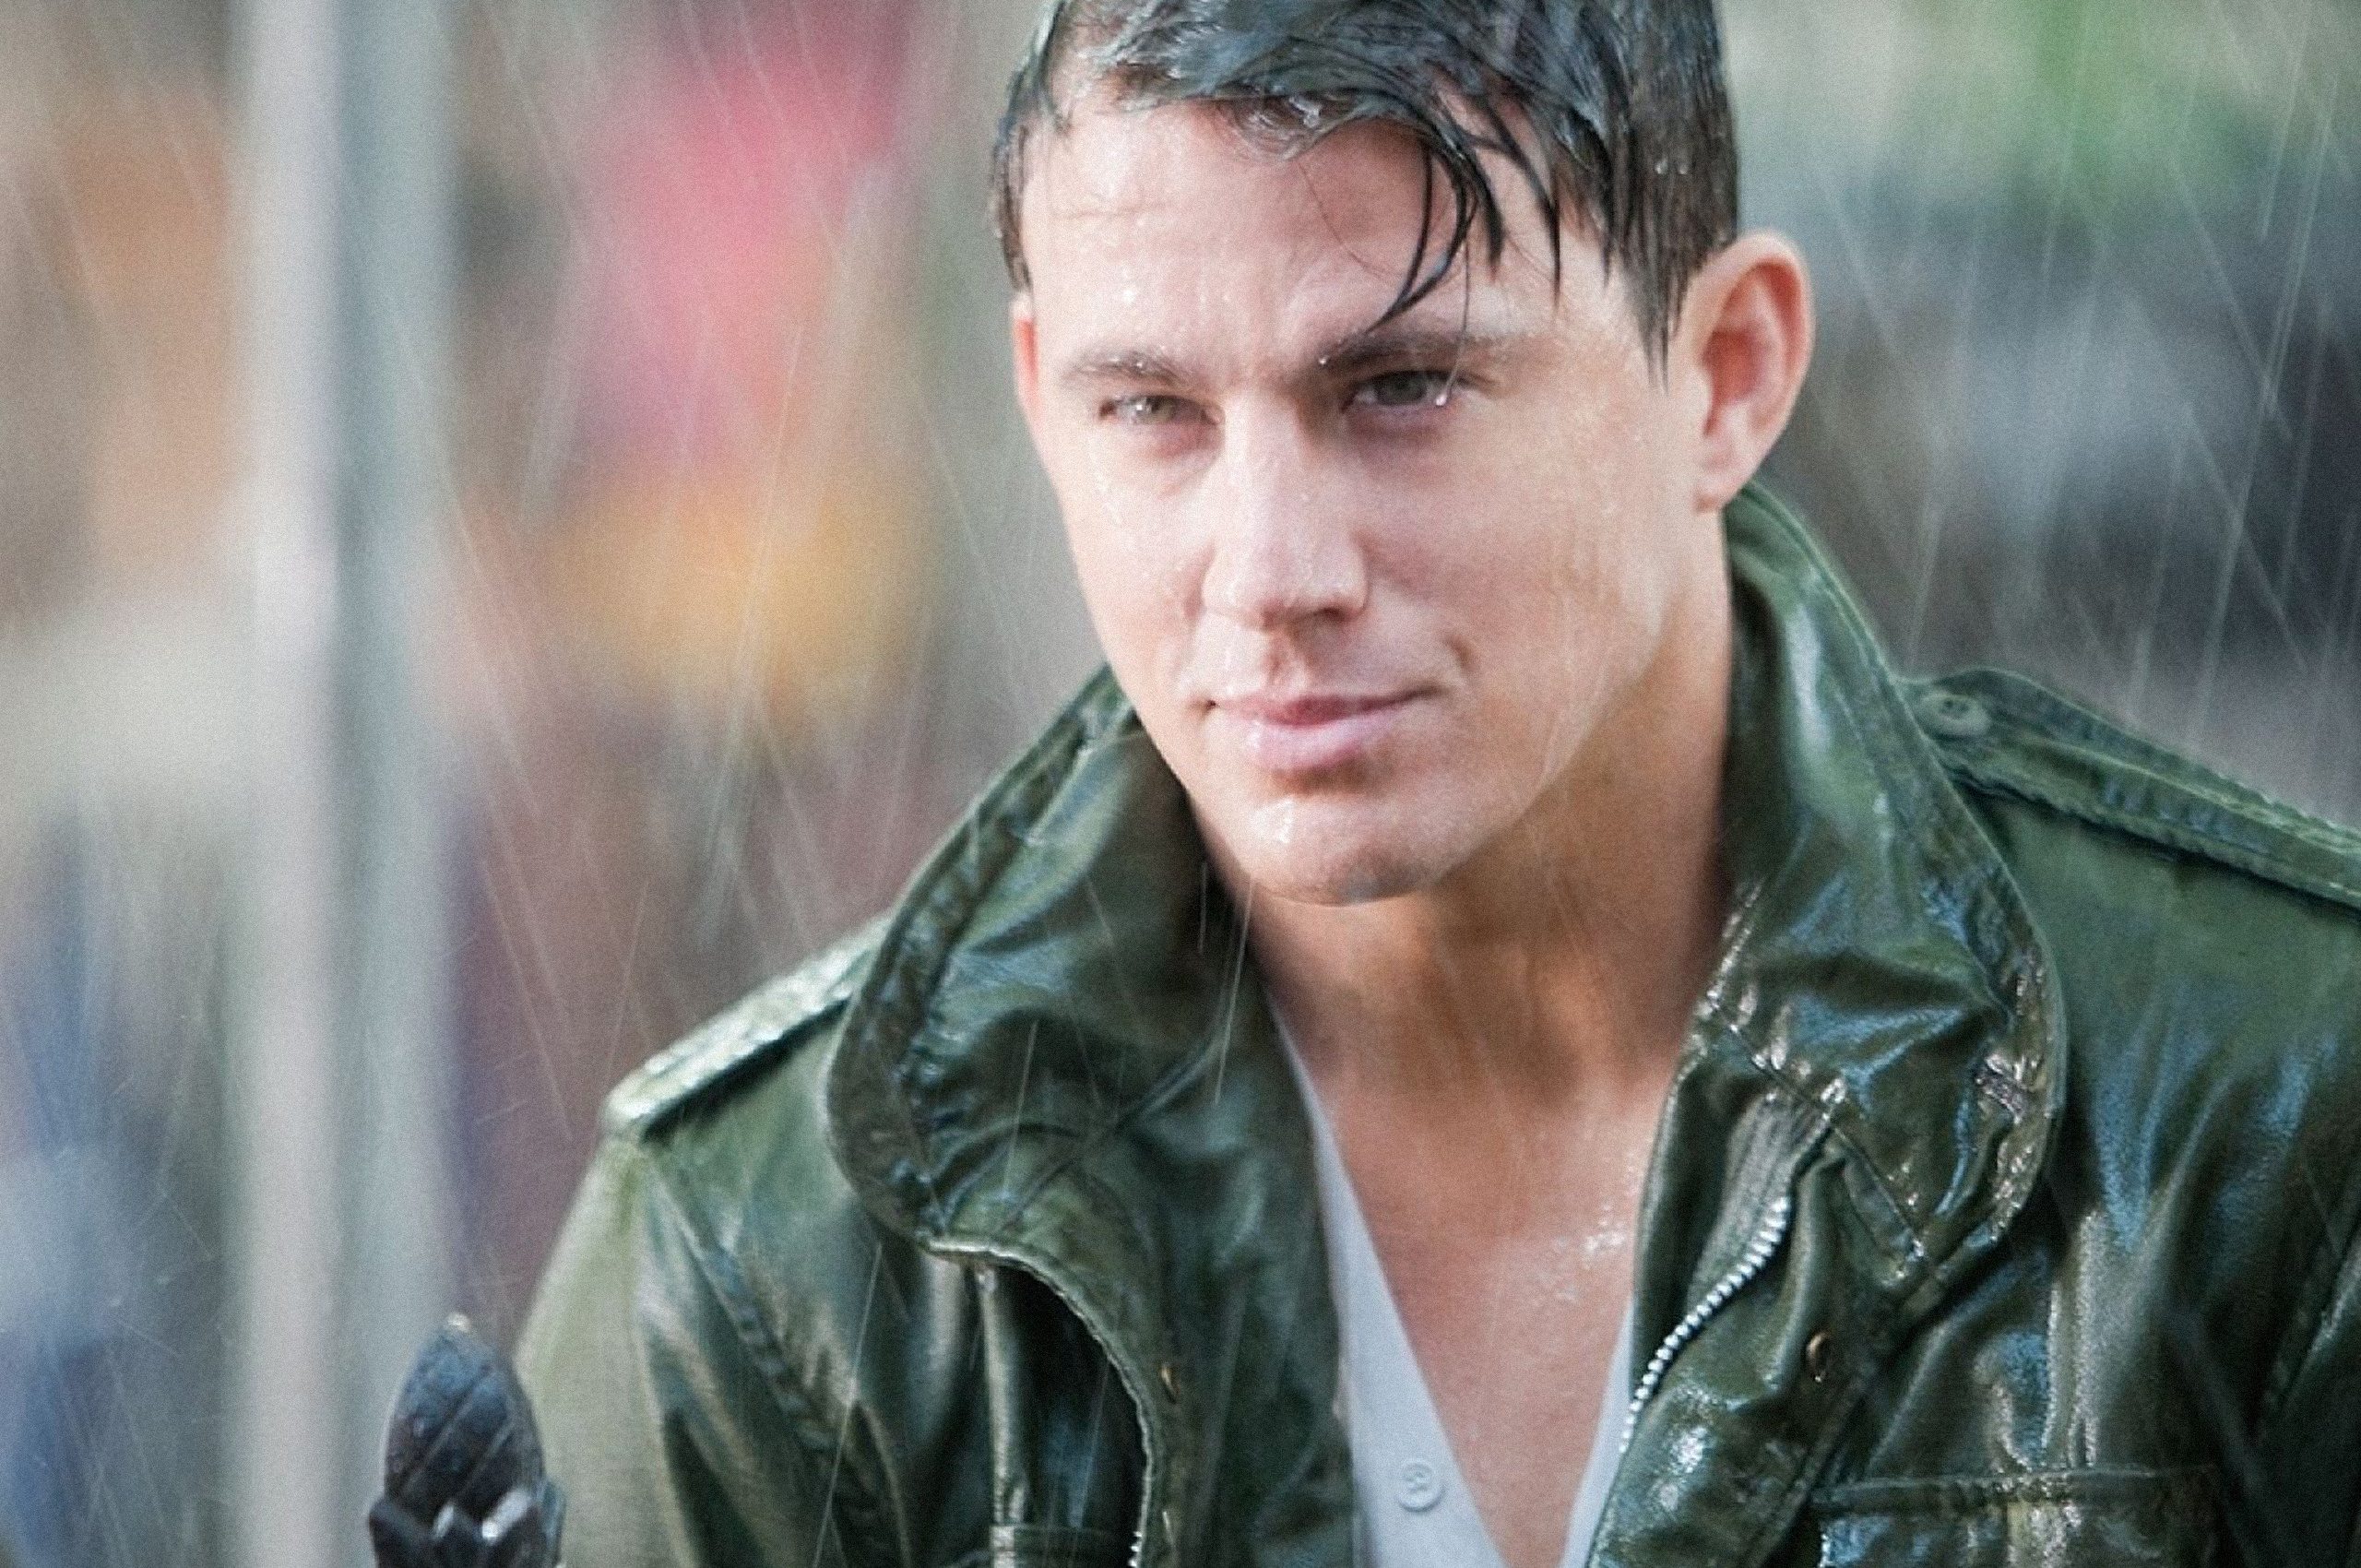 The Vow (Movie): Channing Tatum, One of the 100 most influential people in the world in 2022. 2560x1700 HD Background.